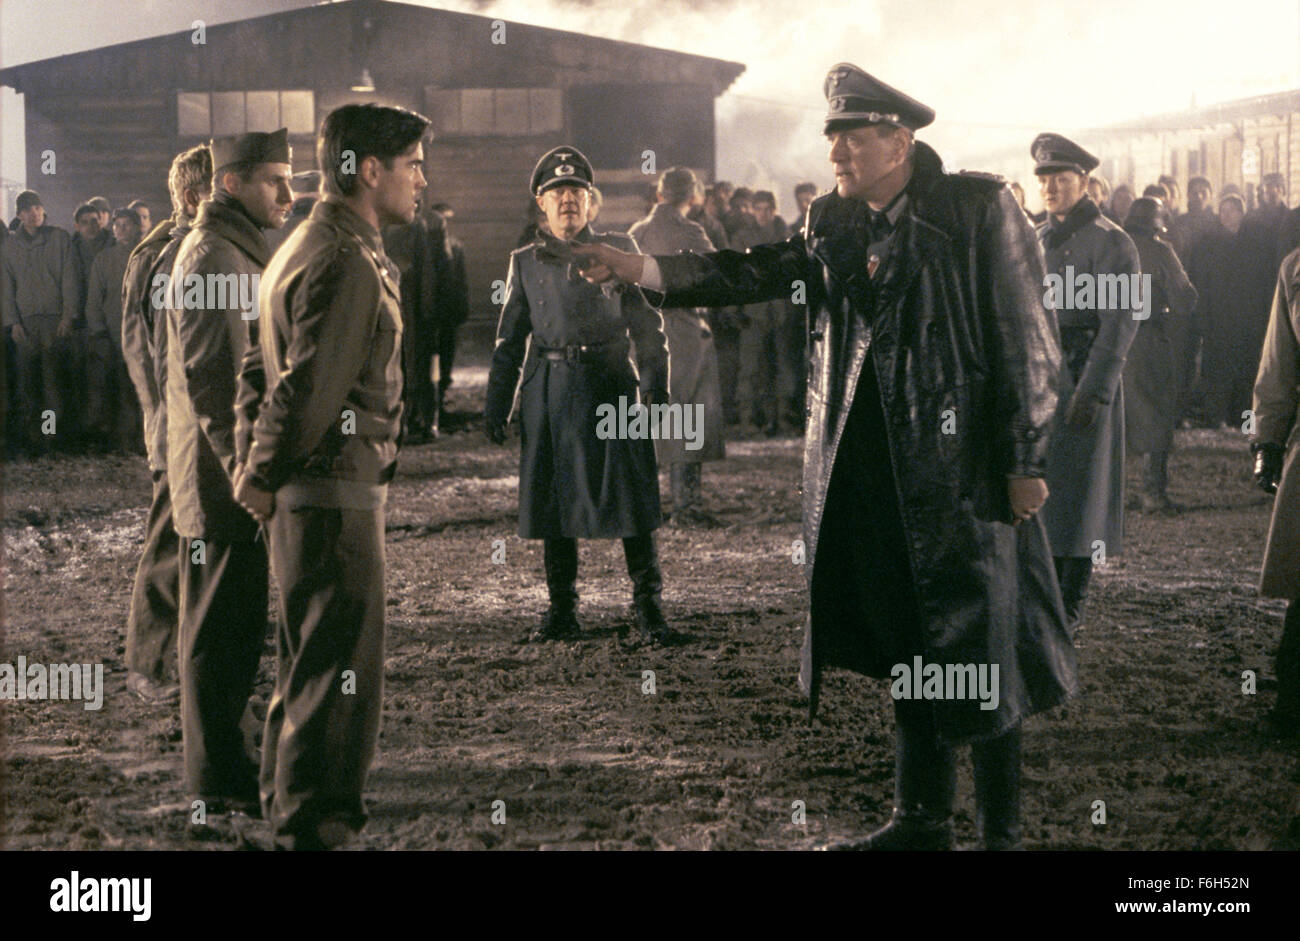 RELEASE DATE: Feb. 15, 2002. MOVIE TITLE: Hart's War. STUDIO: MGM. PLOT: A law student becomes a lieutenant during World War II, is captured and asked to defend a black prisoner of war falsely accused of murder. PICTURED: COLIN FARRELL stars as Lt. Thomas W. Hart and MARCEL IURES as Col. Werner Visser. Stock Photo